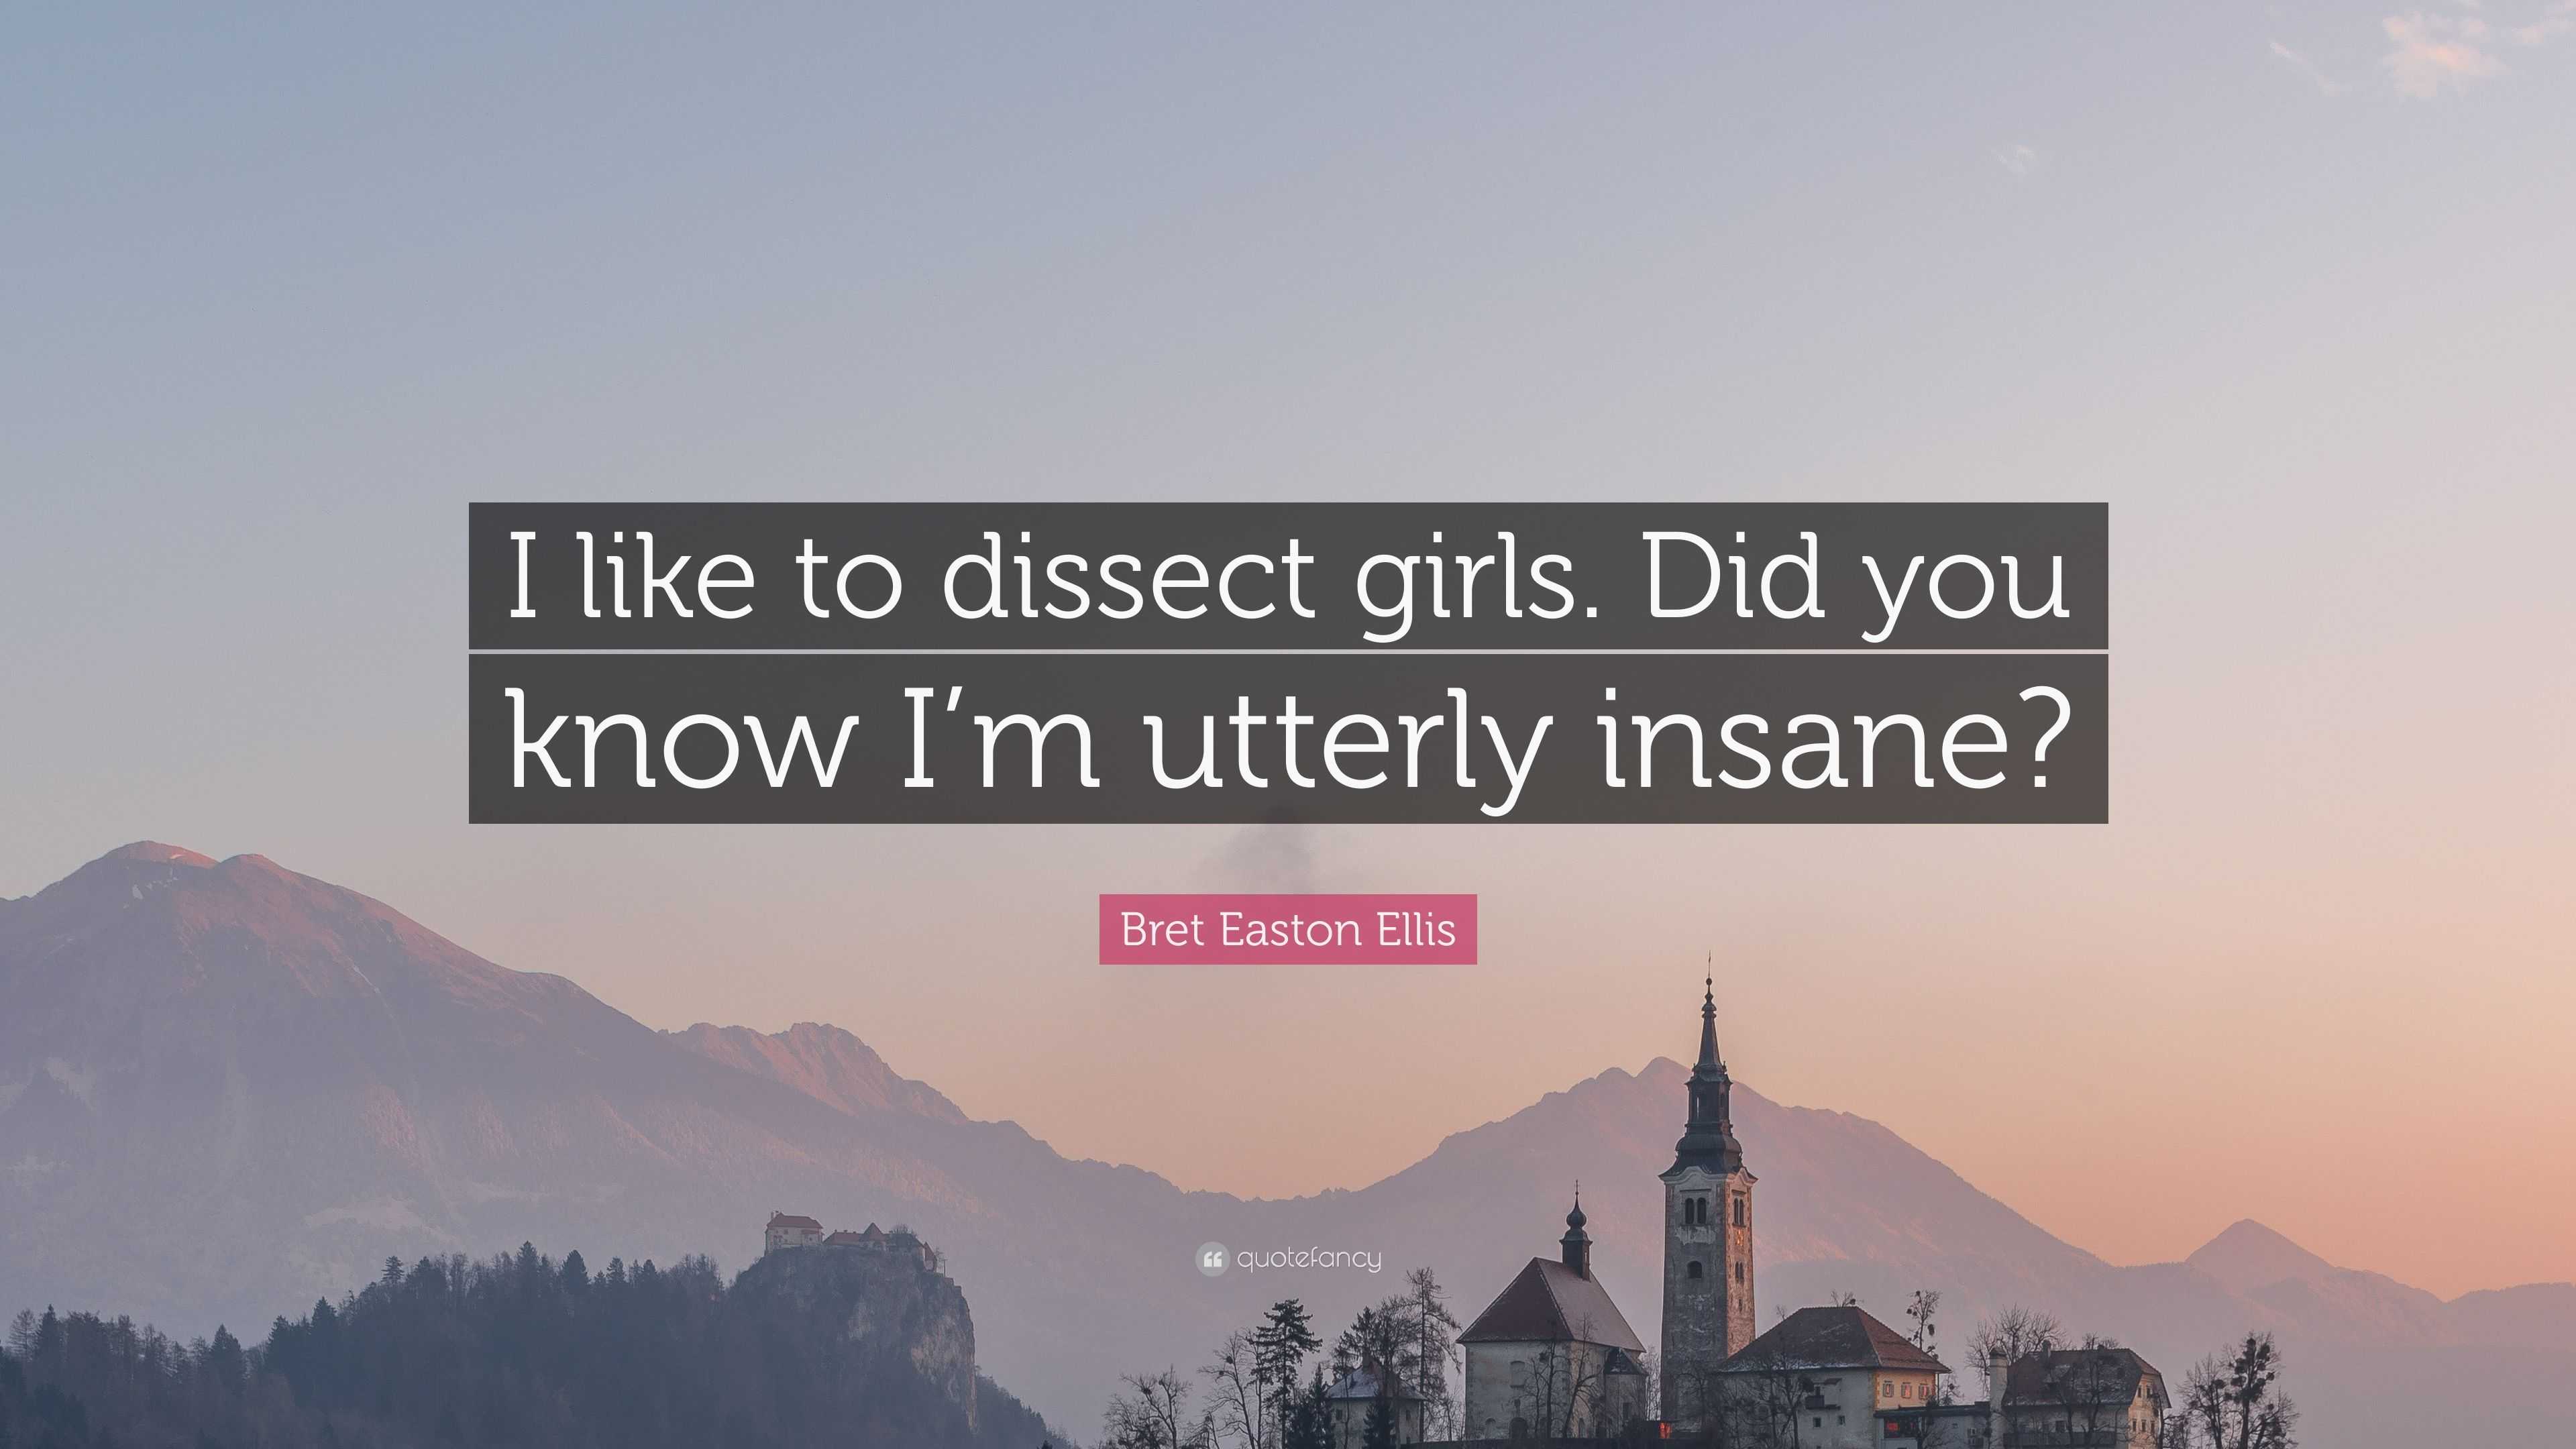 Bret Easton Ellis Quote: “I like to dissect girls. Did you know I’m ...